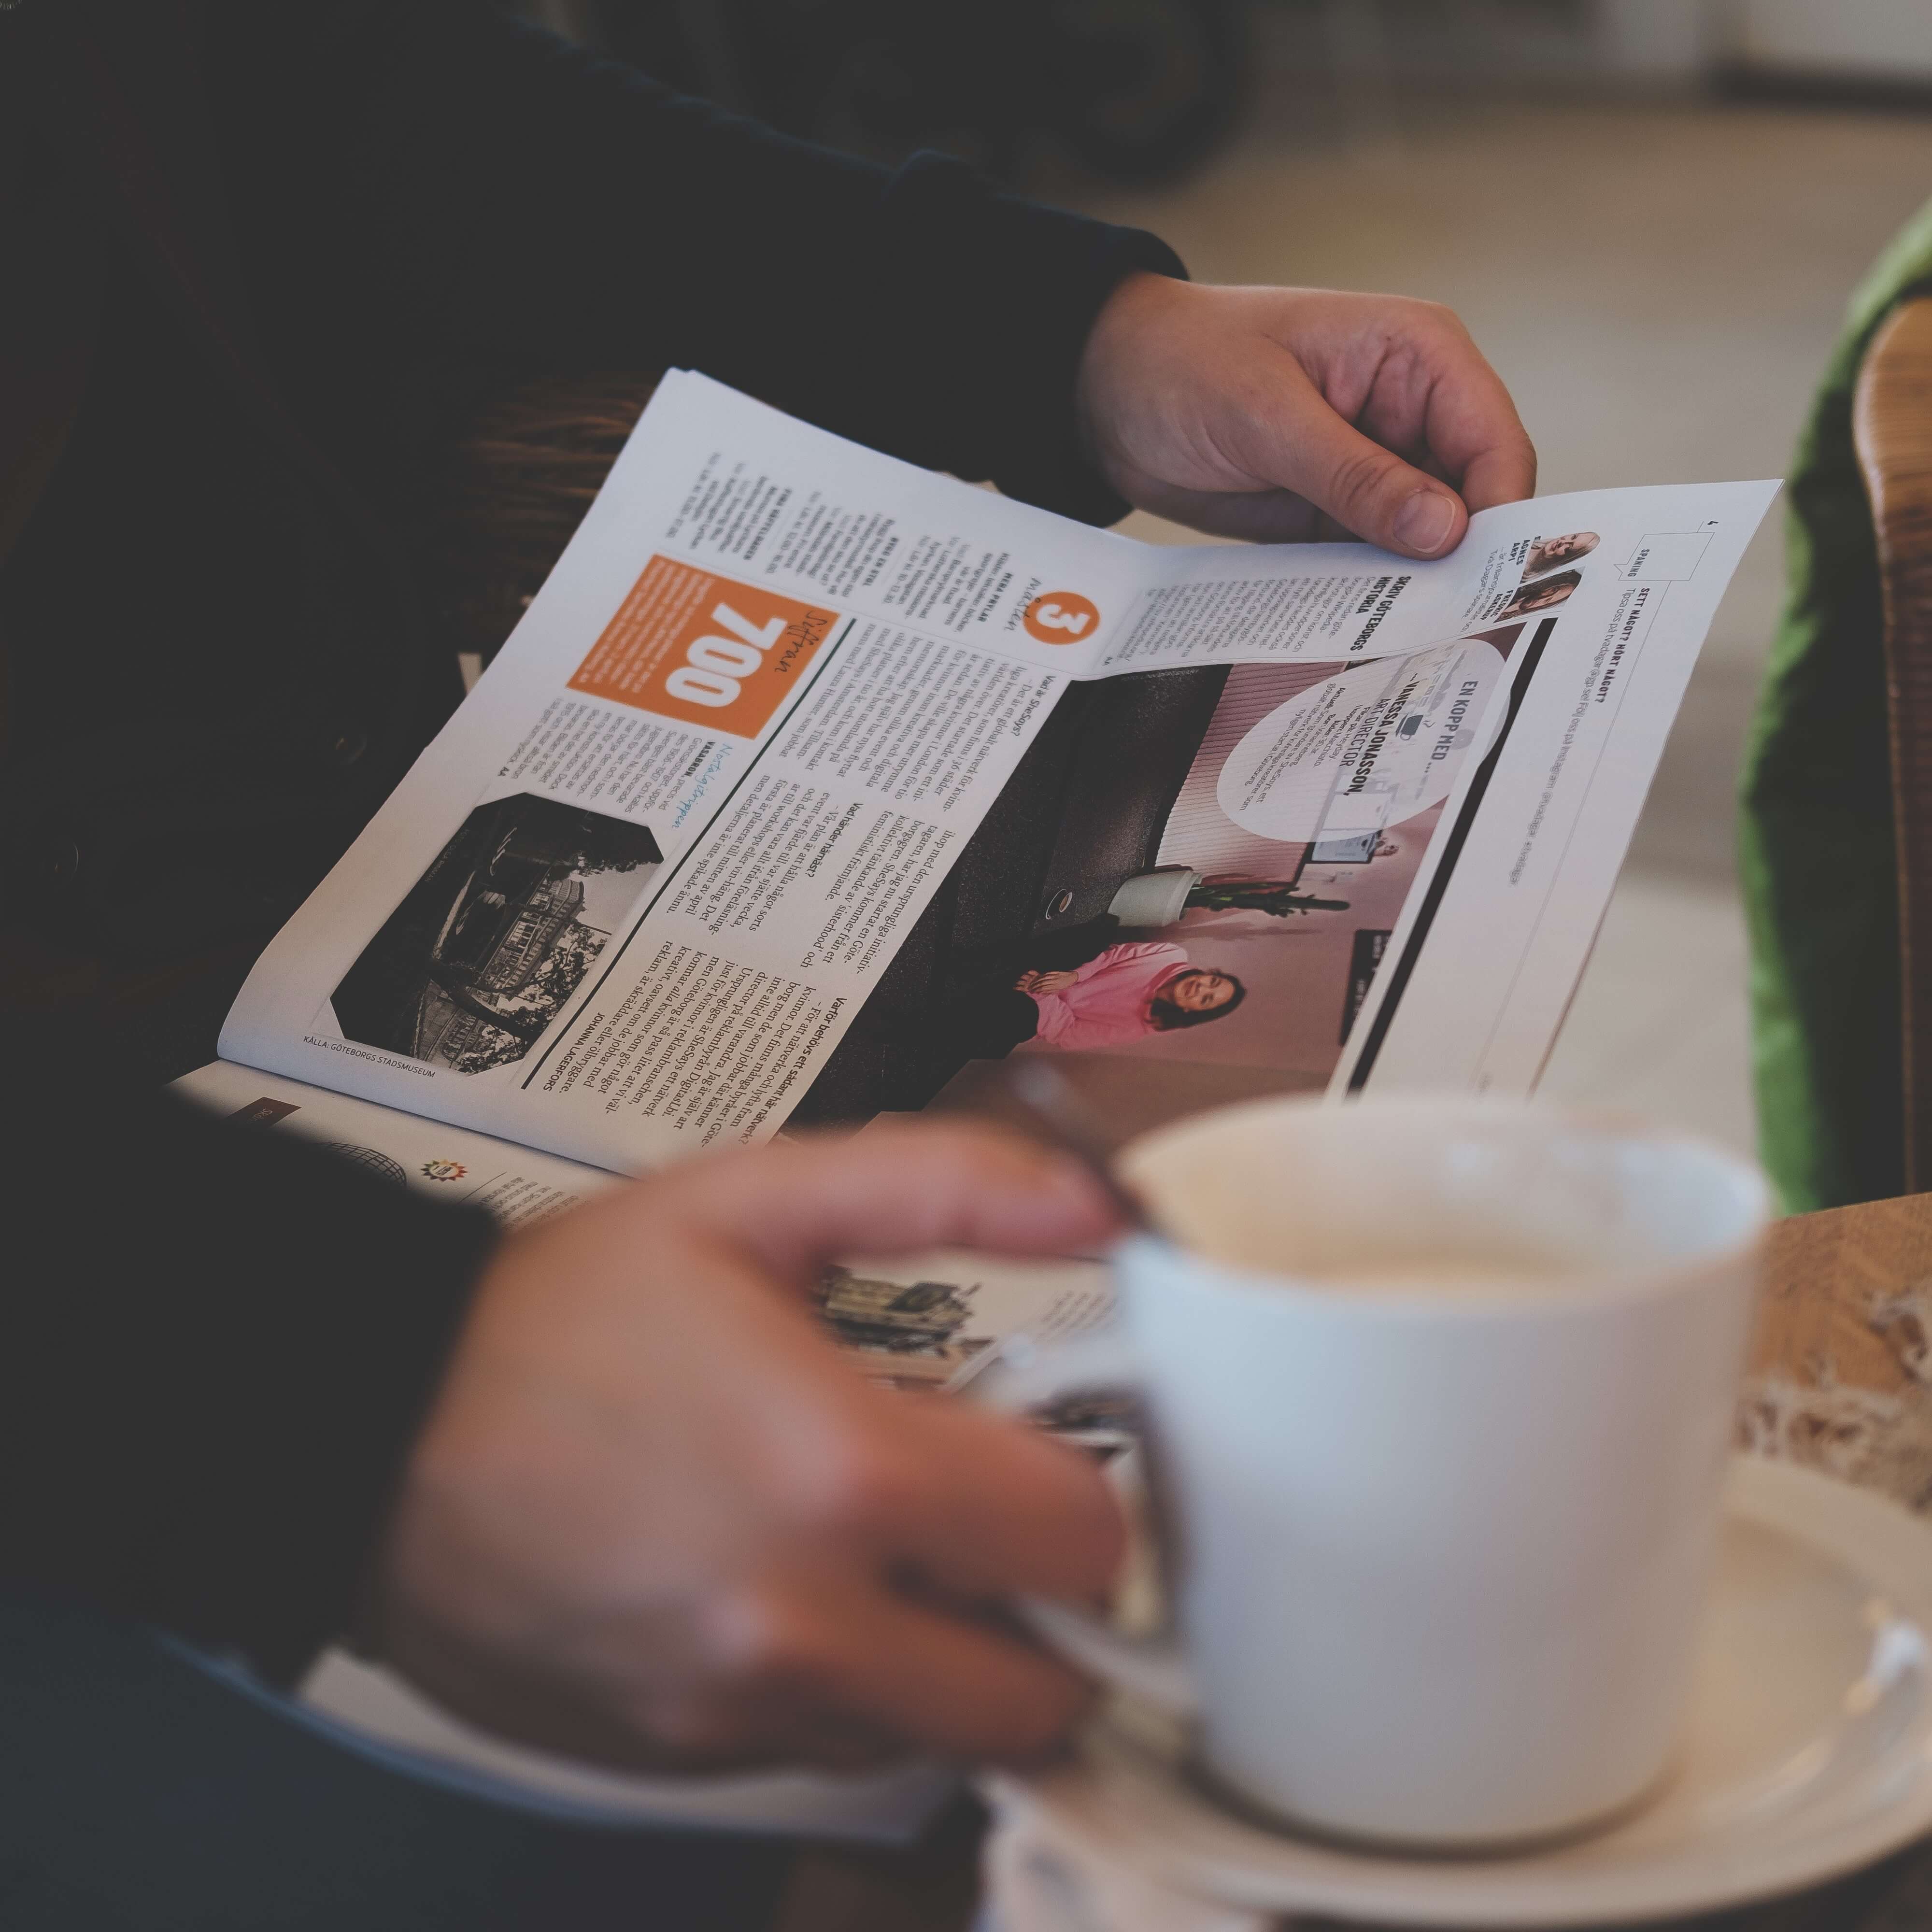 A person reads the news paper whilst holding a cup.